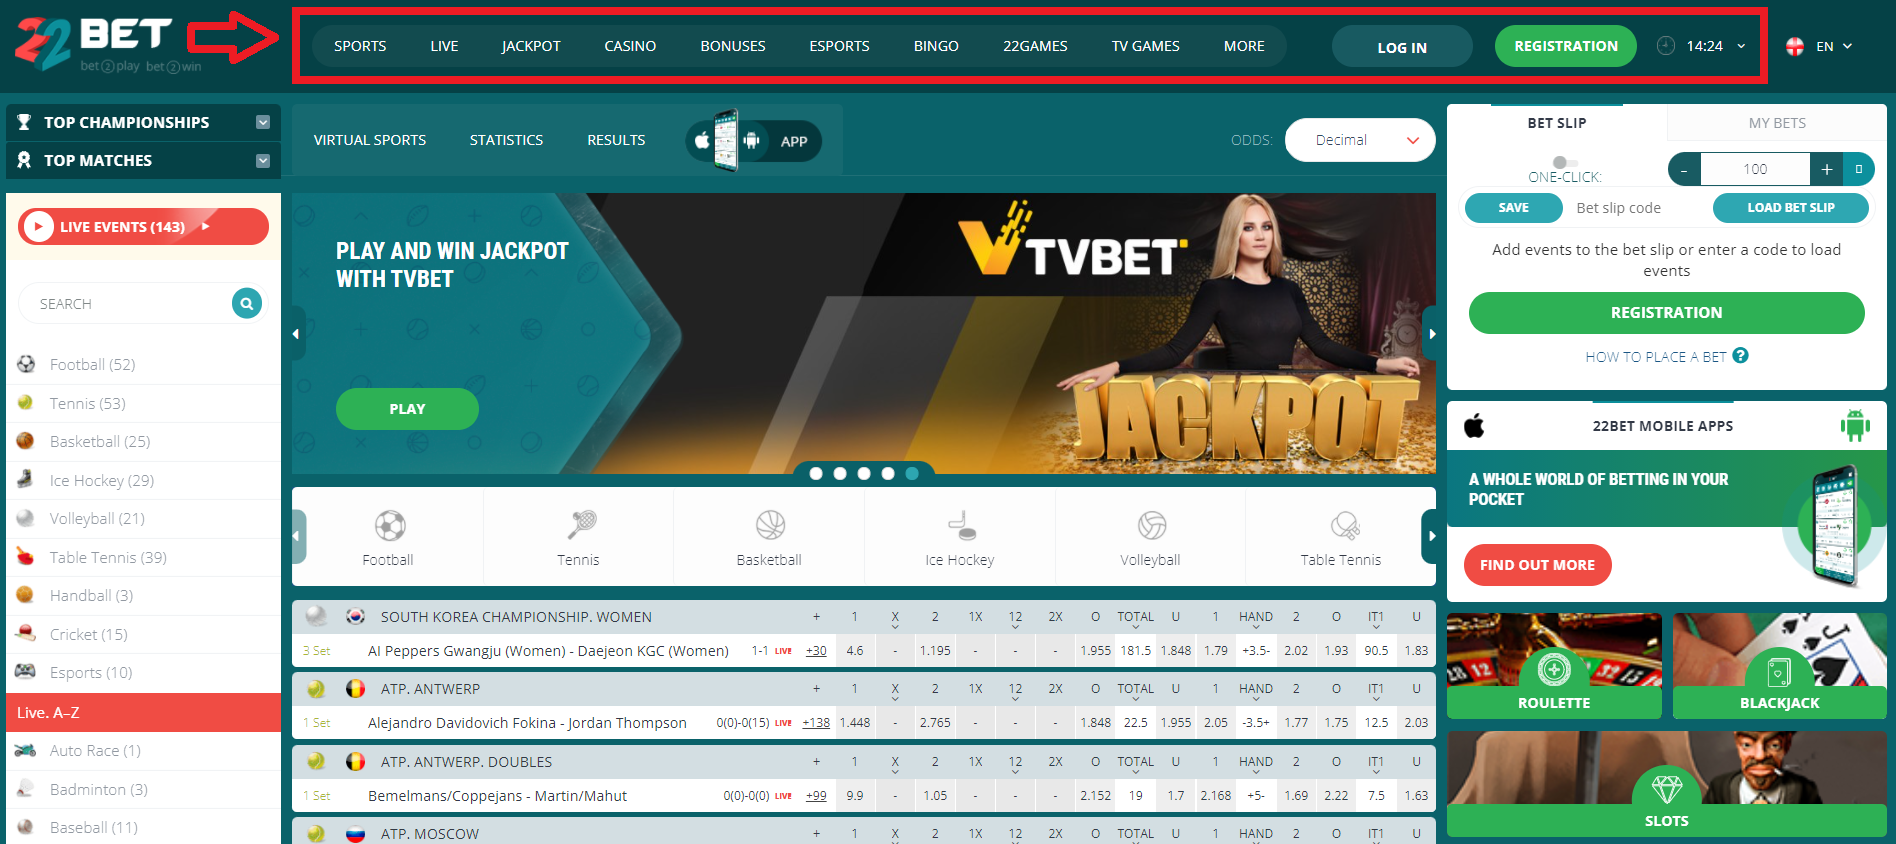 General review of the 22Bet website and app